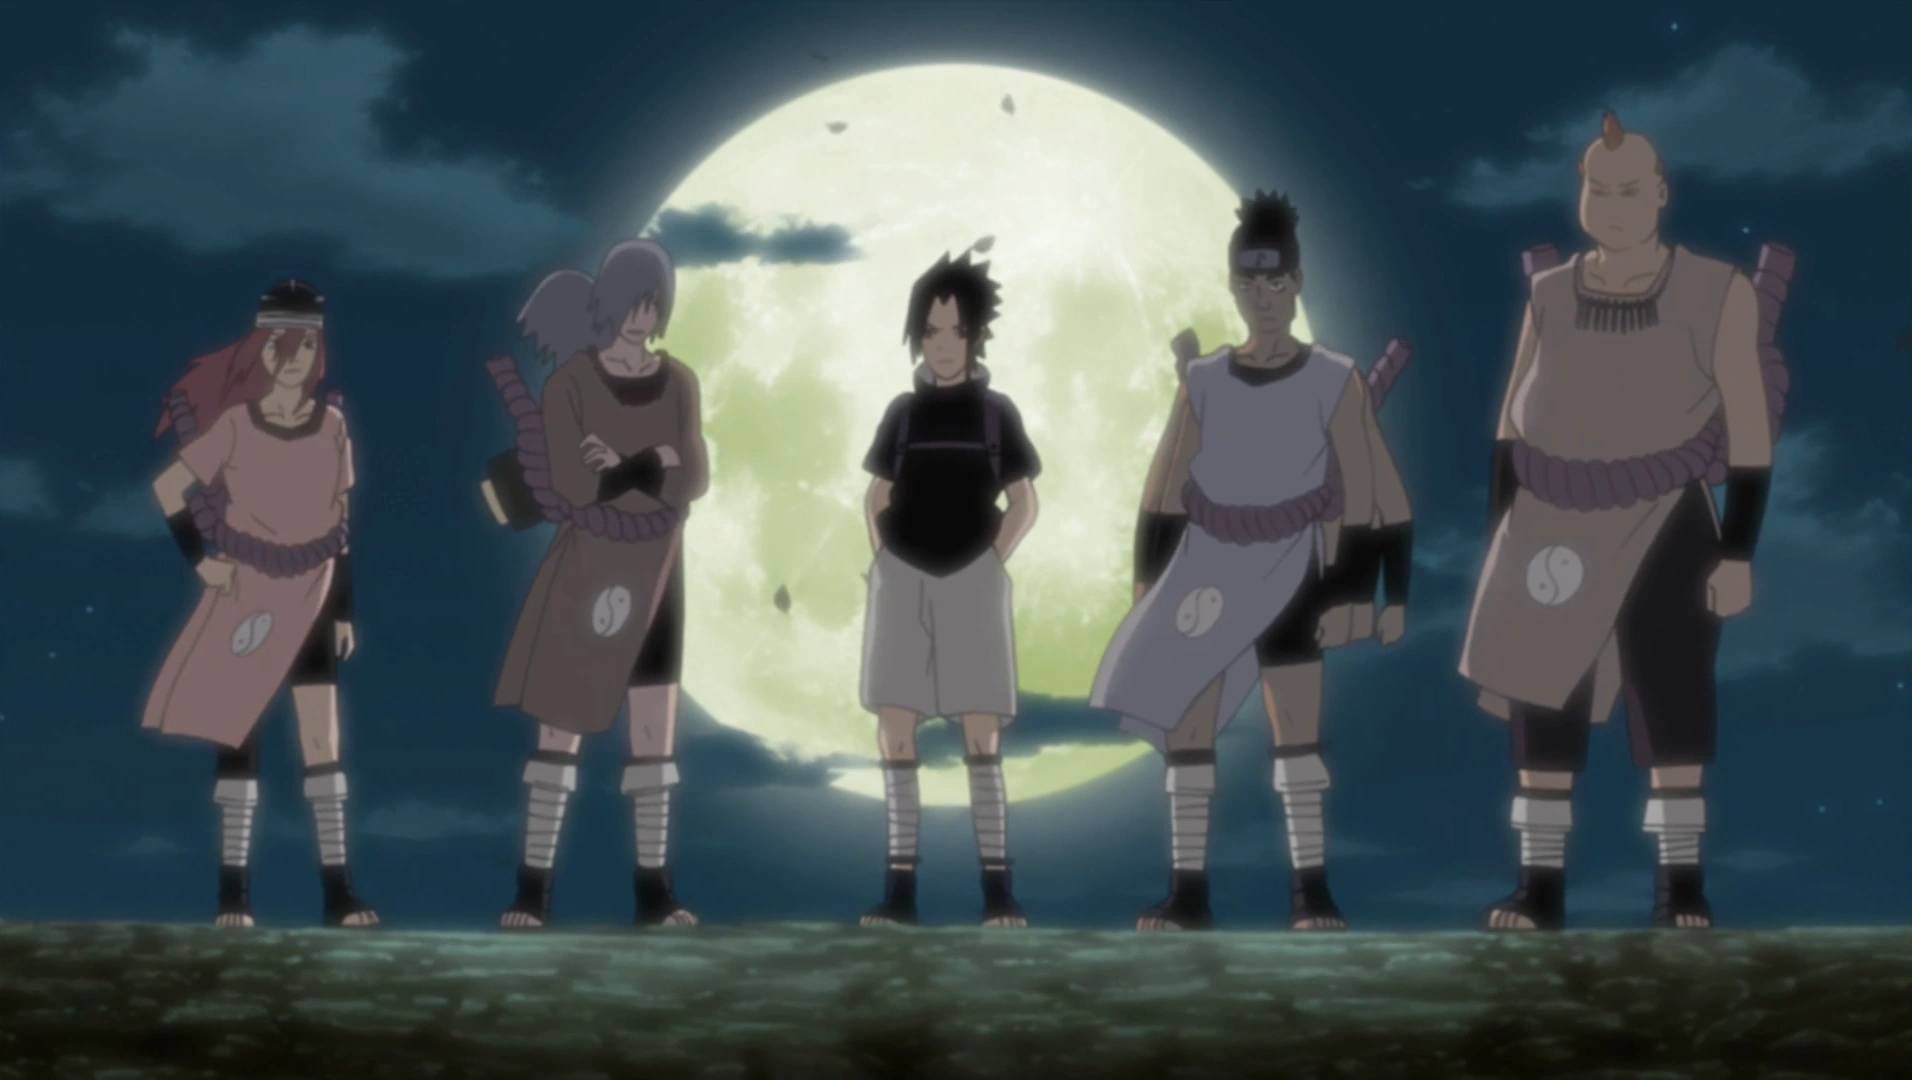 The Sound Four And Sasuke Standing In The Moonlight in Naruto